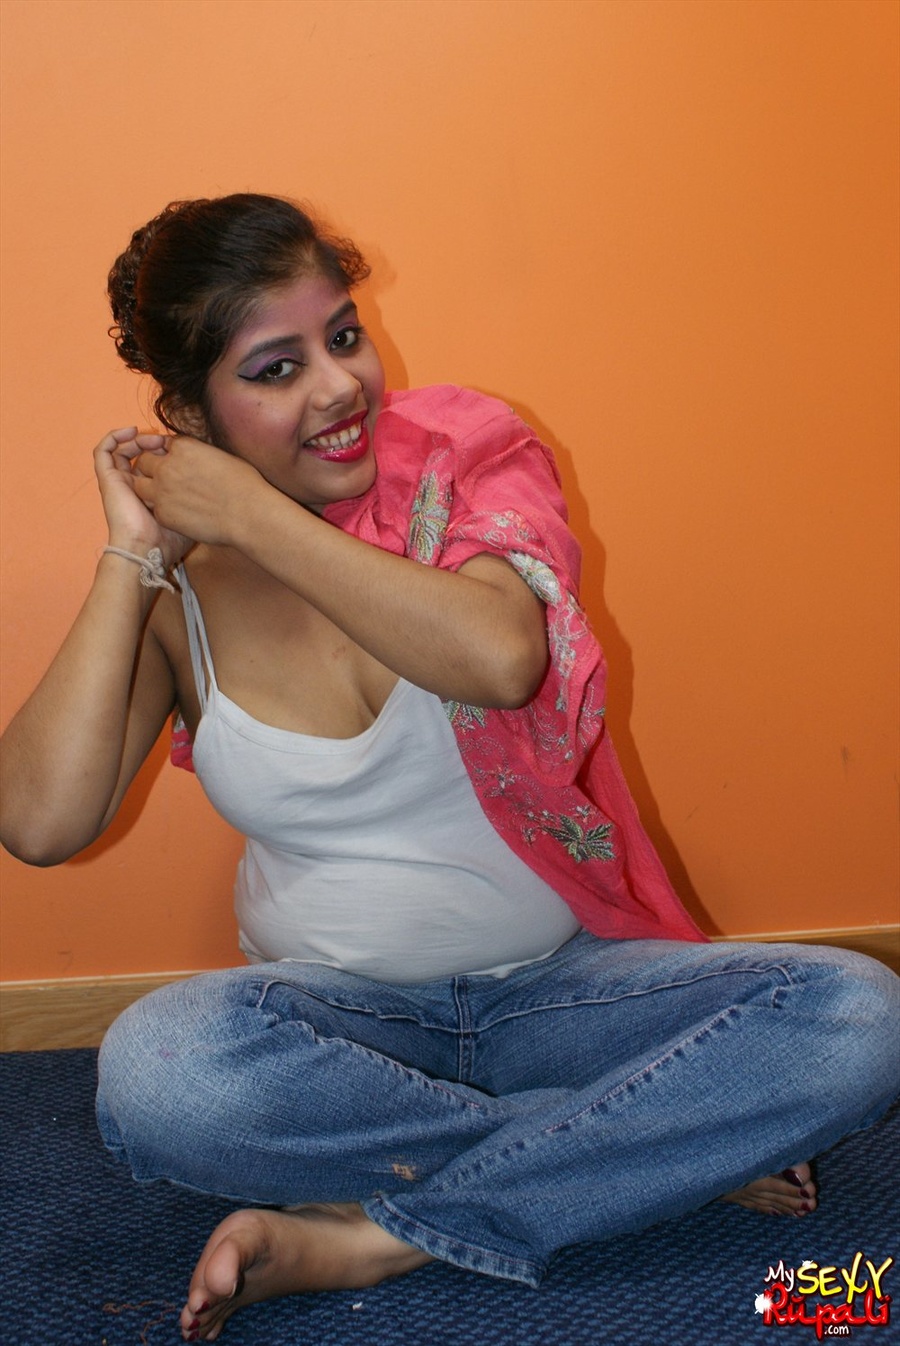 Slutty ponytailed Indian bitch taking off her jeans and demonstrating her cooch and ass - XXXonXXX - Pic 4